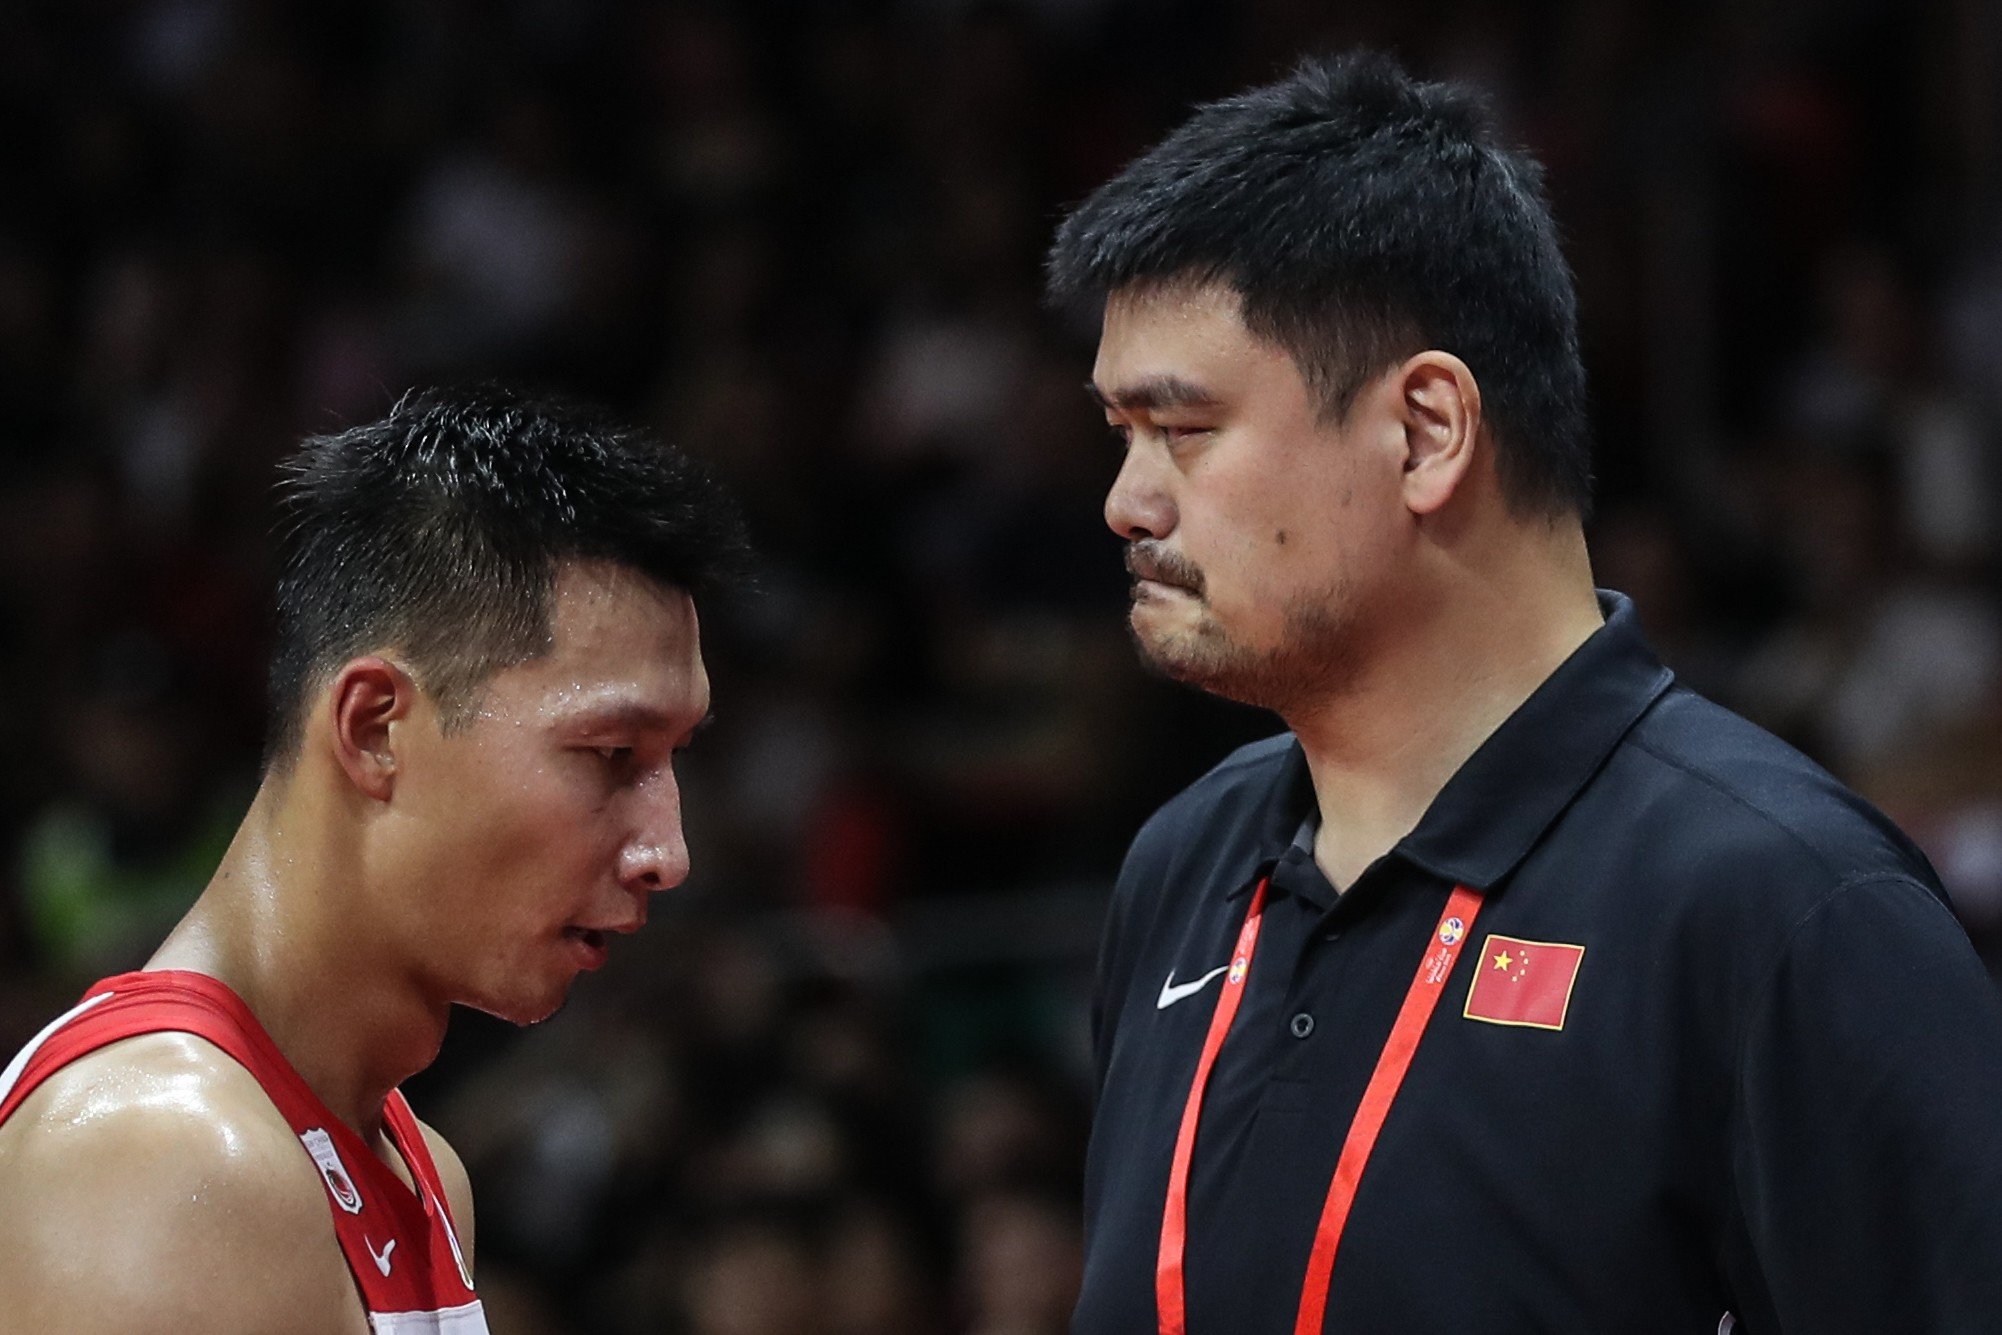 Yao Ming, chairman of the Chinese Basketball Association, pictured with star player Yi Jianlian after their loss to Nigeria at the 2019 Fiba World Cup. Photo: Xinhua